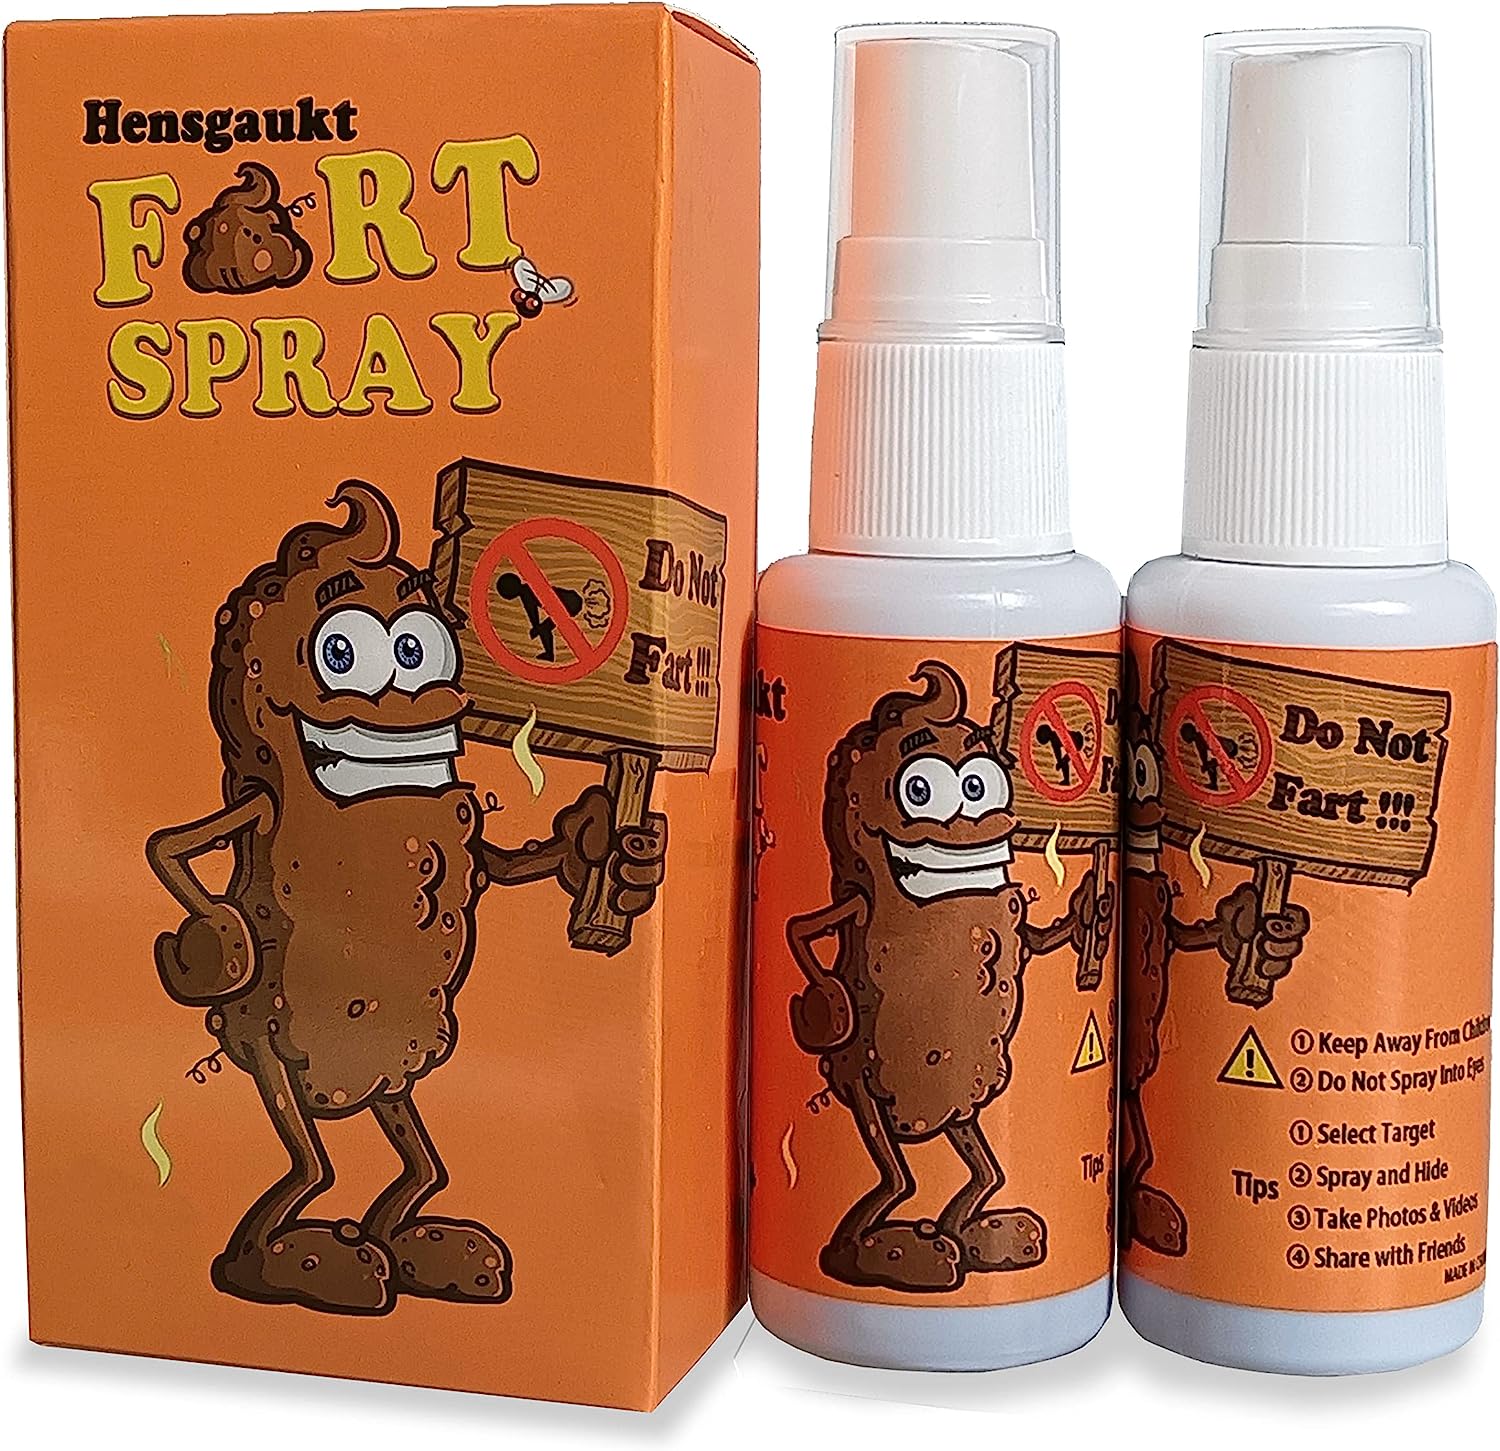 Hensgaukt Stink Fart Spray Extra Strong Smelly Like [...]